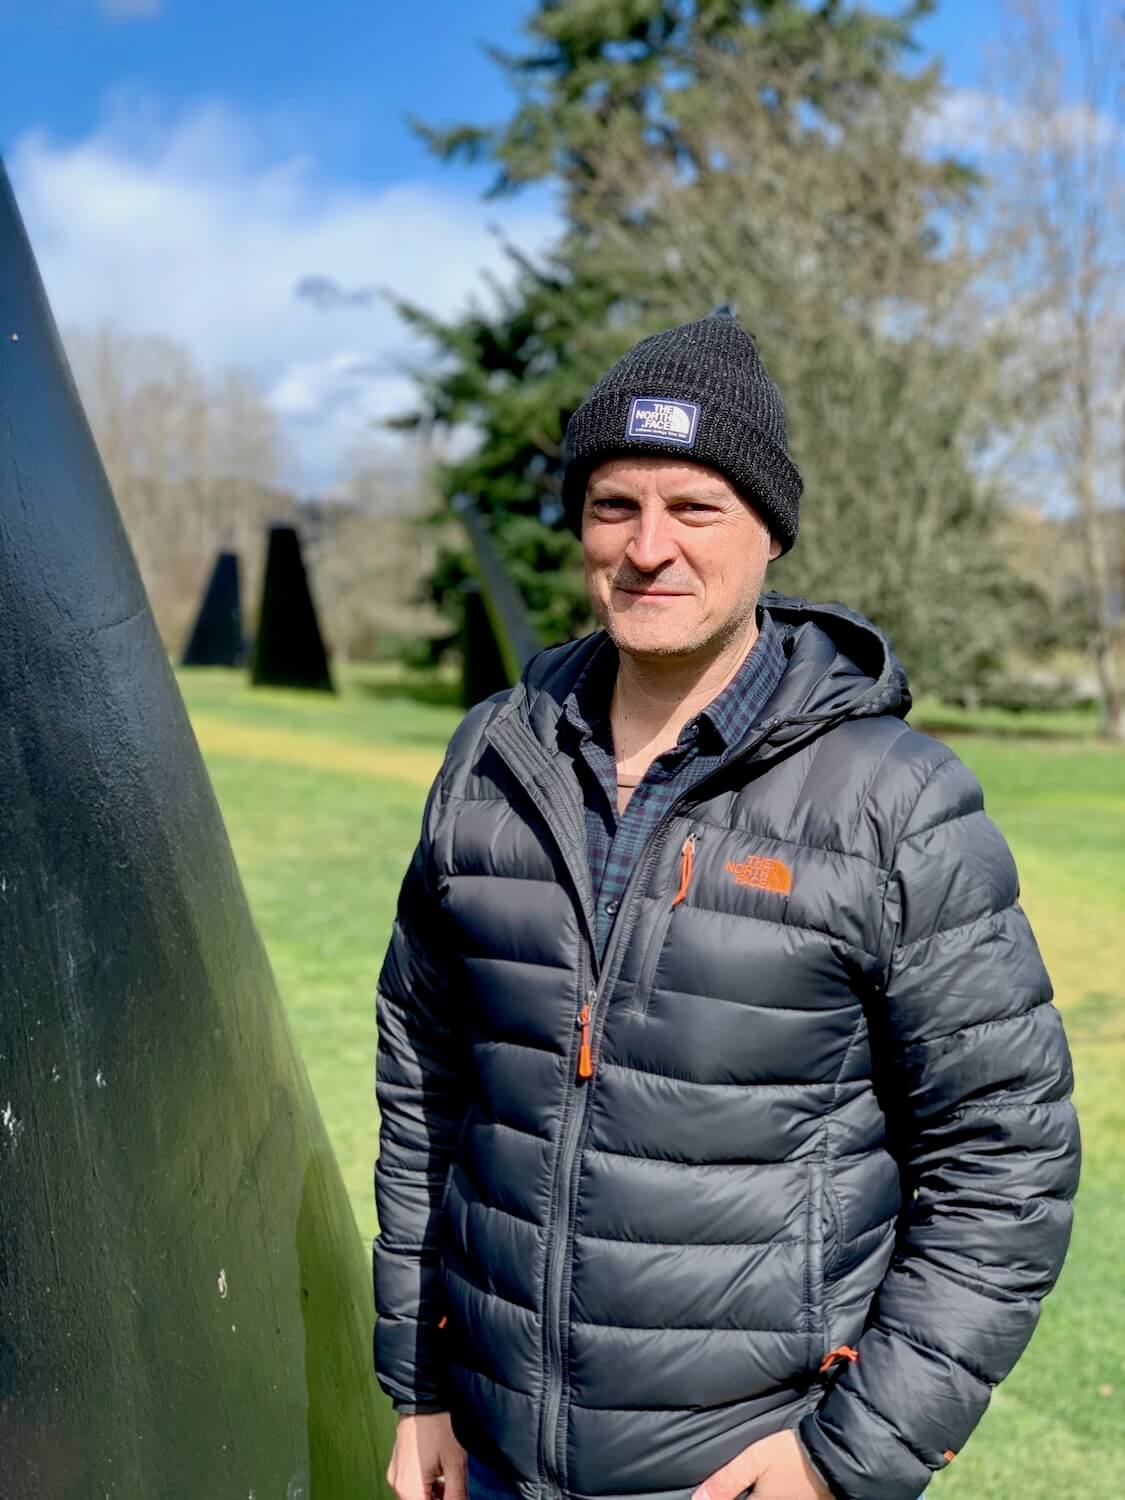 Matthew Kessi stands next to a former submarine stabilizer fin in The Fin Project.  He is wearing a North Face cap and jacket and other layers of clothing.  Other fins rise up in the out of focus background.  This is a great outdoor activity in winter in Seattle.  